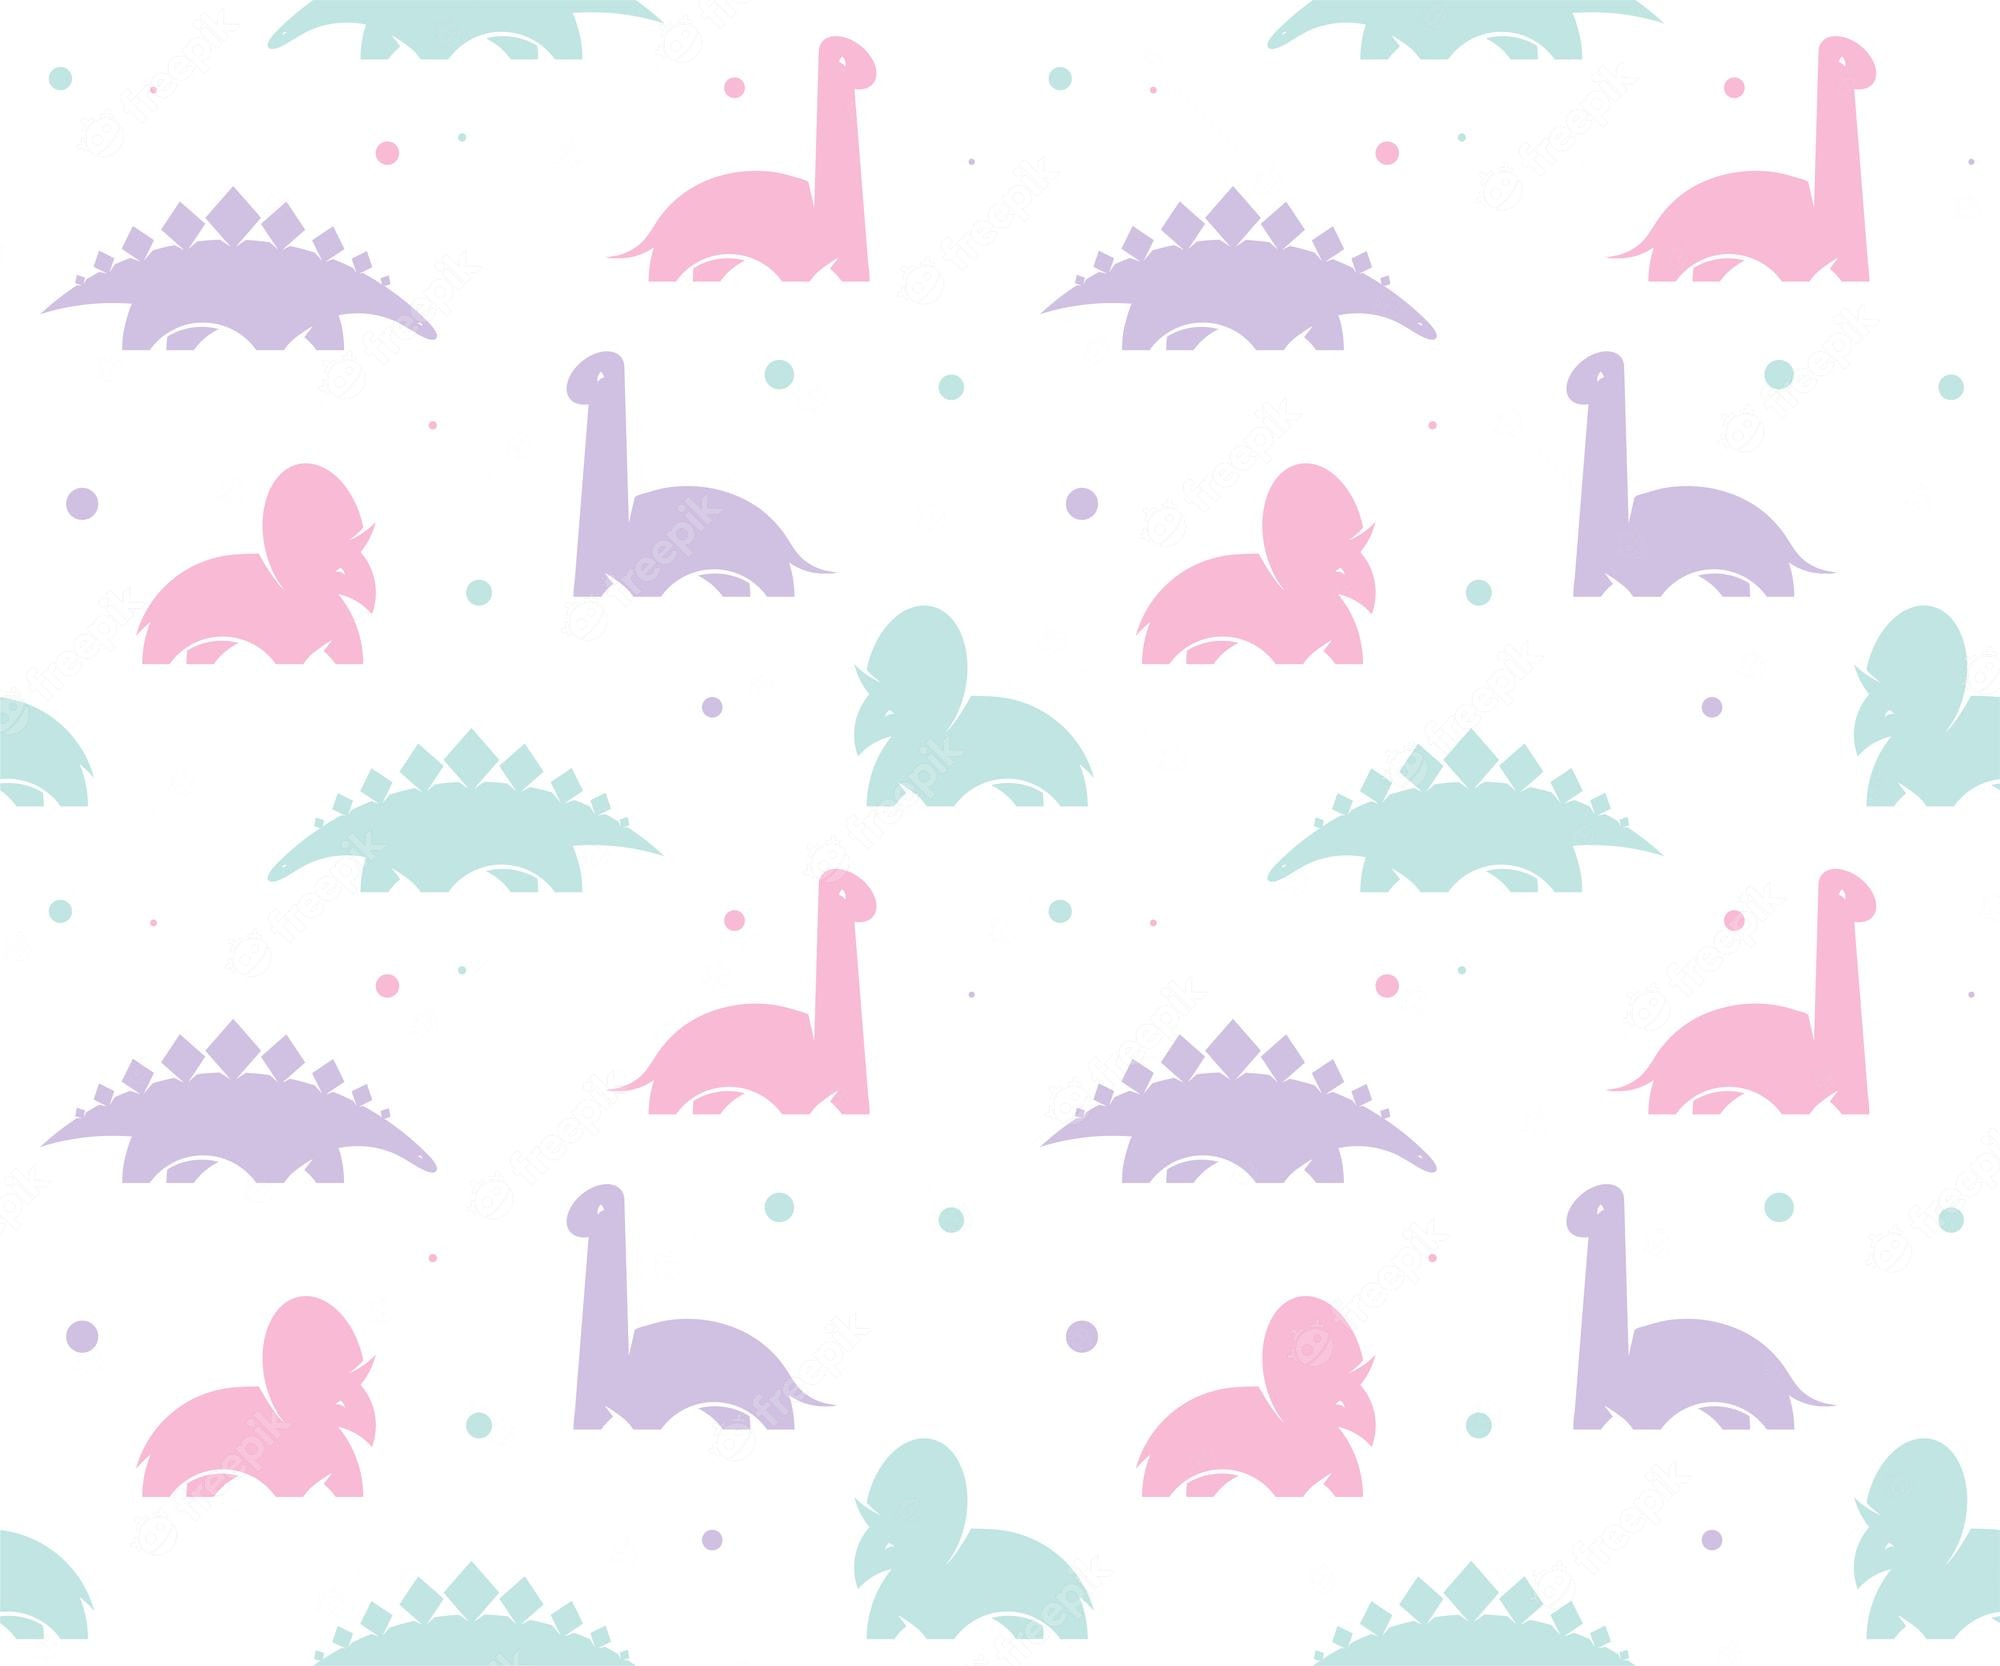 Page dino wallpaper vectors illustrations for free download